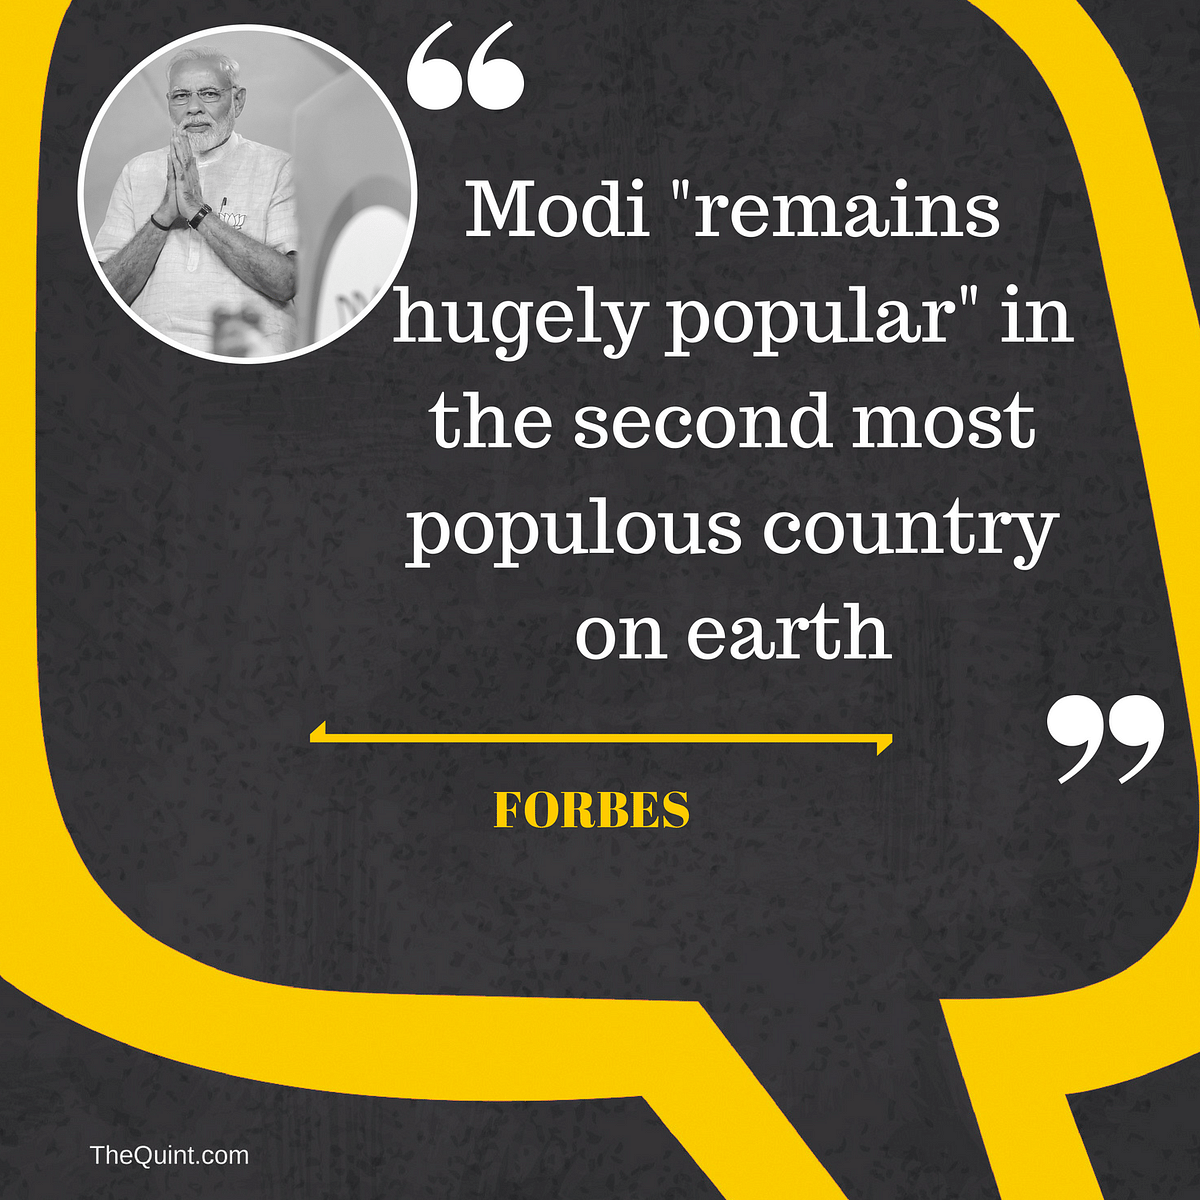 Modi ranks 9th on the Forbes 2018 list of 75 of the World’s Most Powerful People who make the world turn.